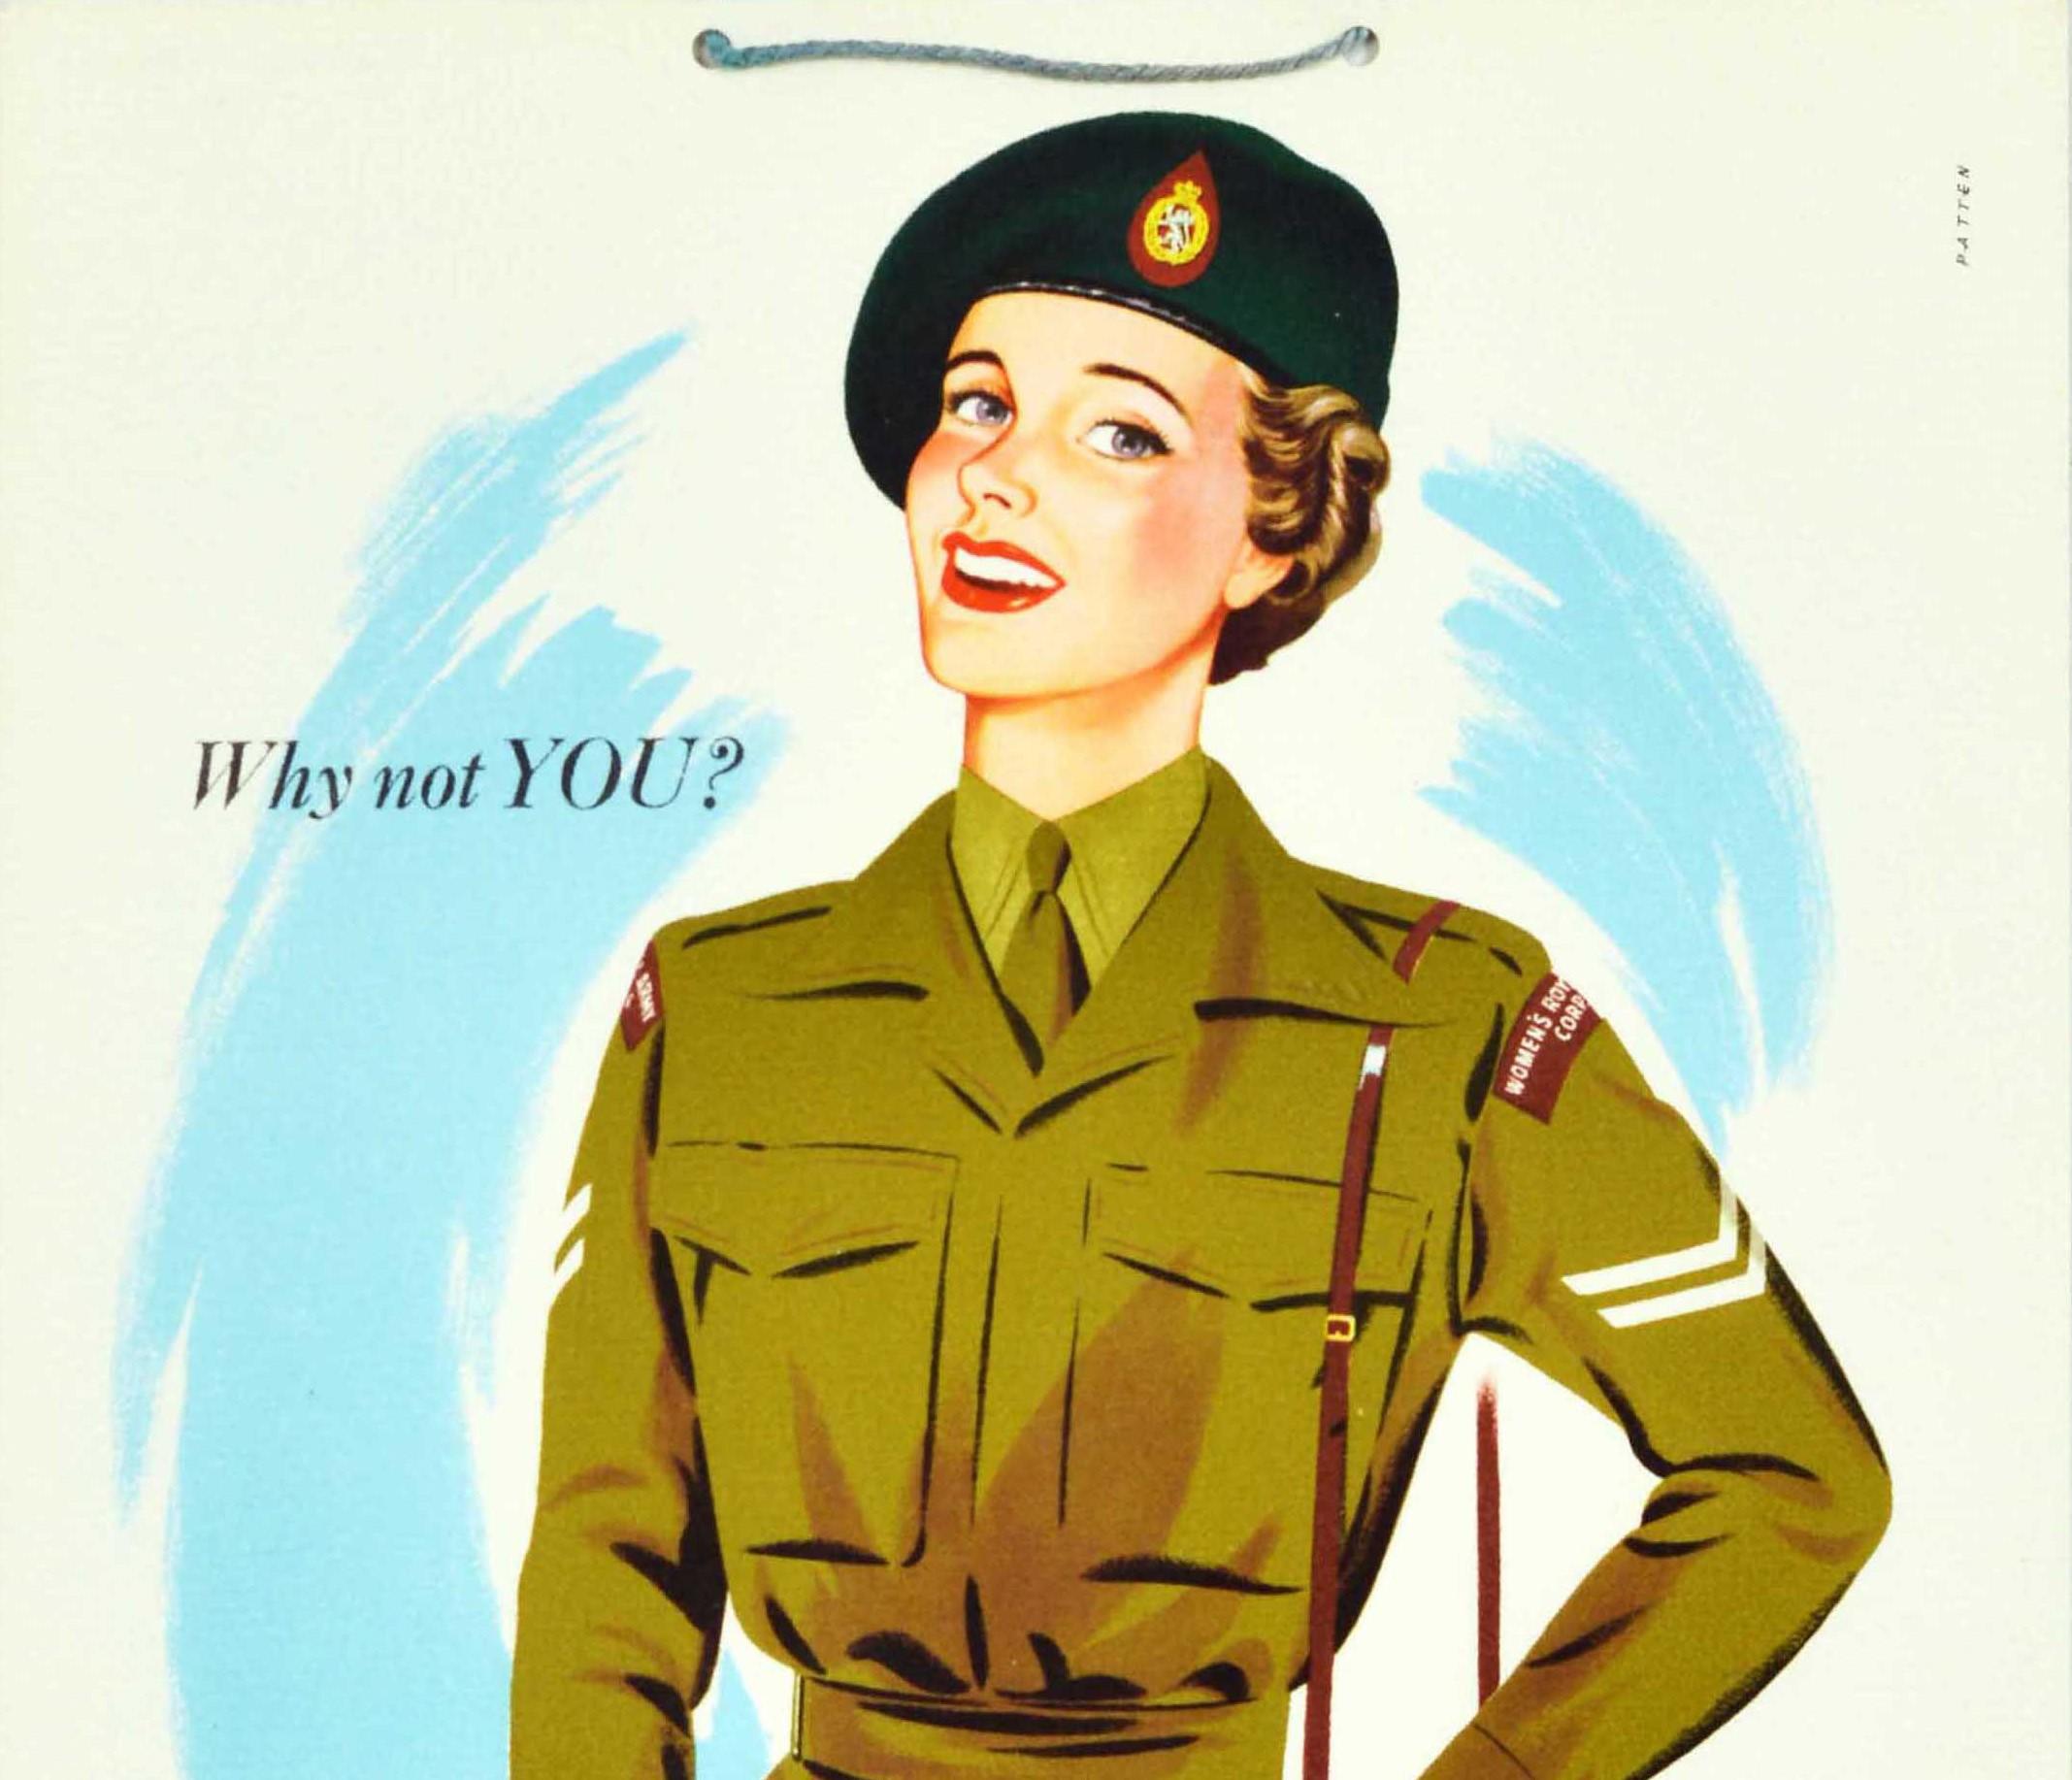 Original vintage British military recruitment poster for the Women's Royal Army Corps (1949-1992) Territorial Army - Why not You? Join the WRAC (TA) and make your spare time worth while - featuring a young lady in army uniform smiling to the viewer